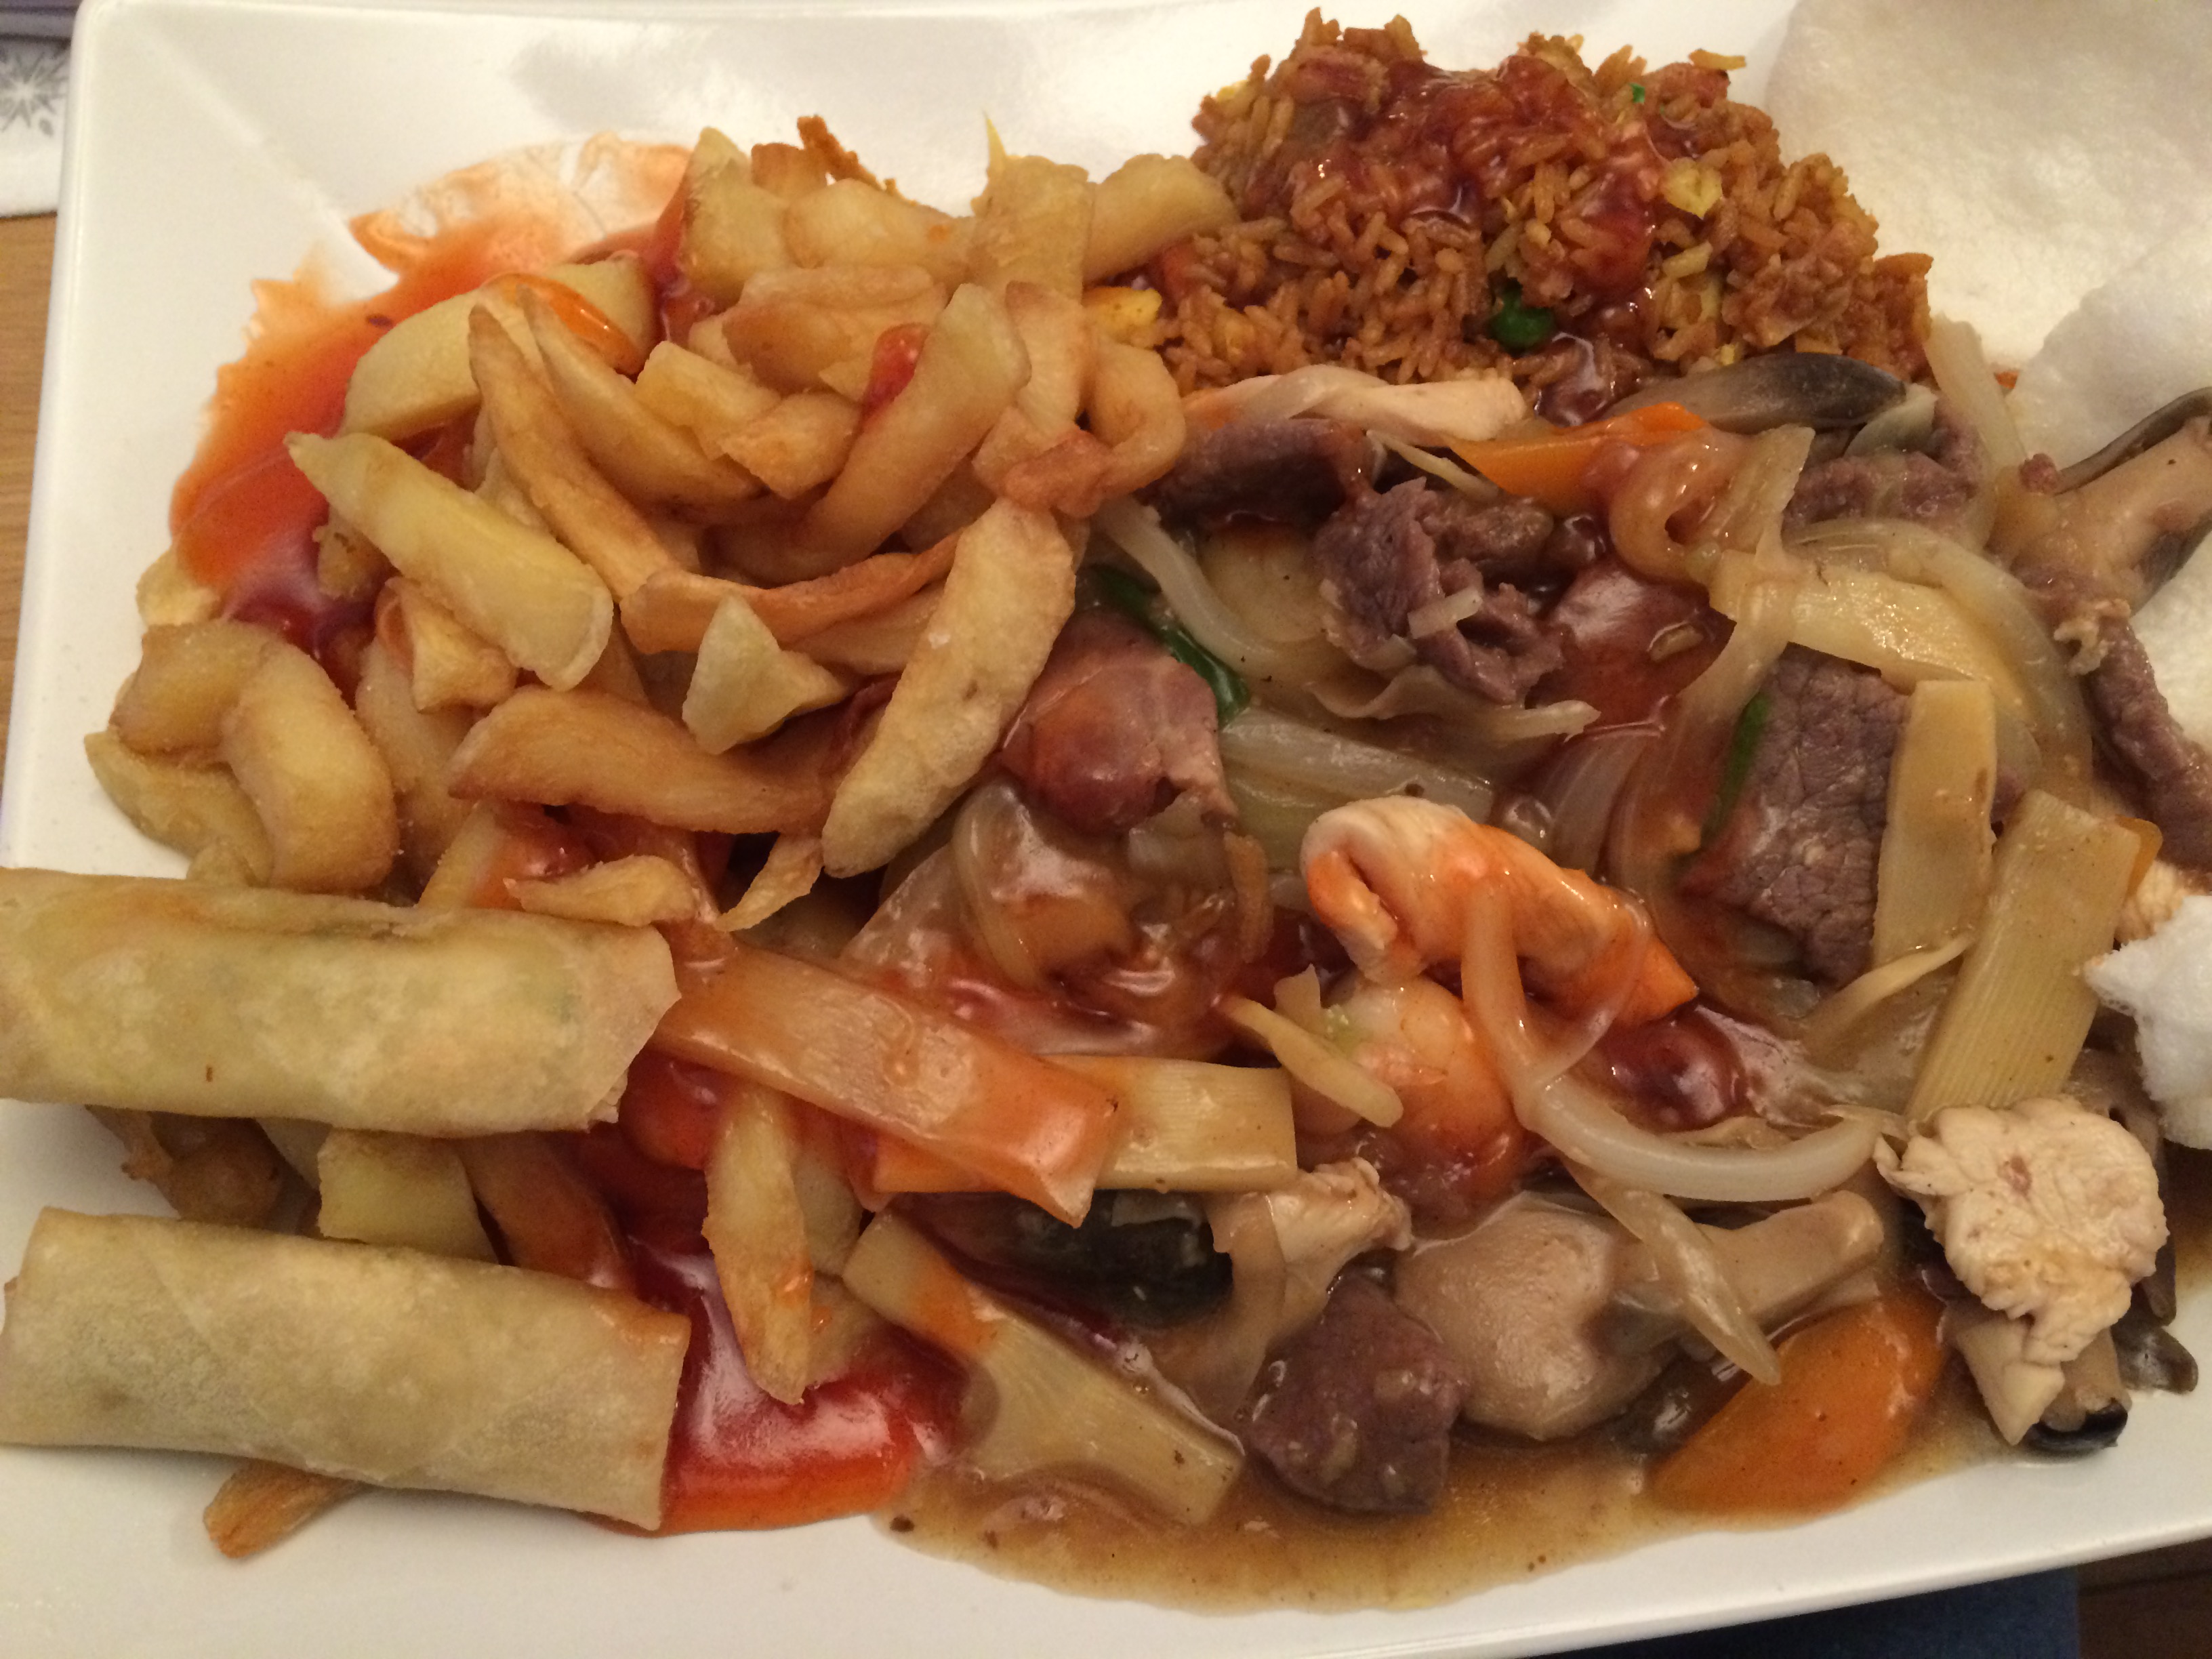 Dirty Takeaway Pictures Volume 3 - Page 39 - Food, Drink & Restaurants - PistonHeads